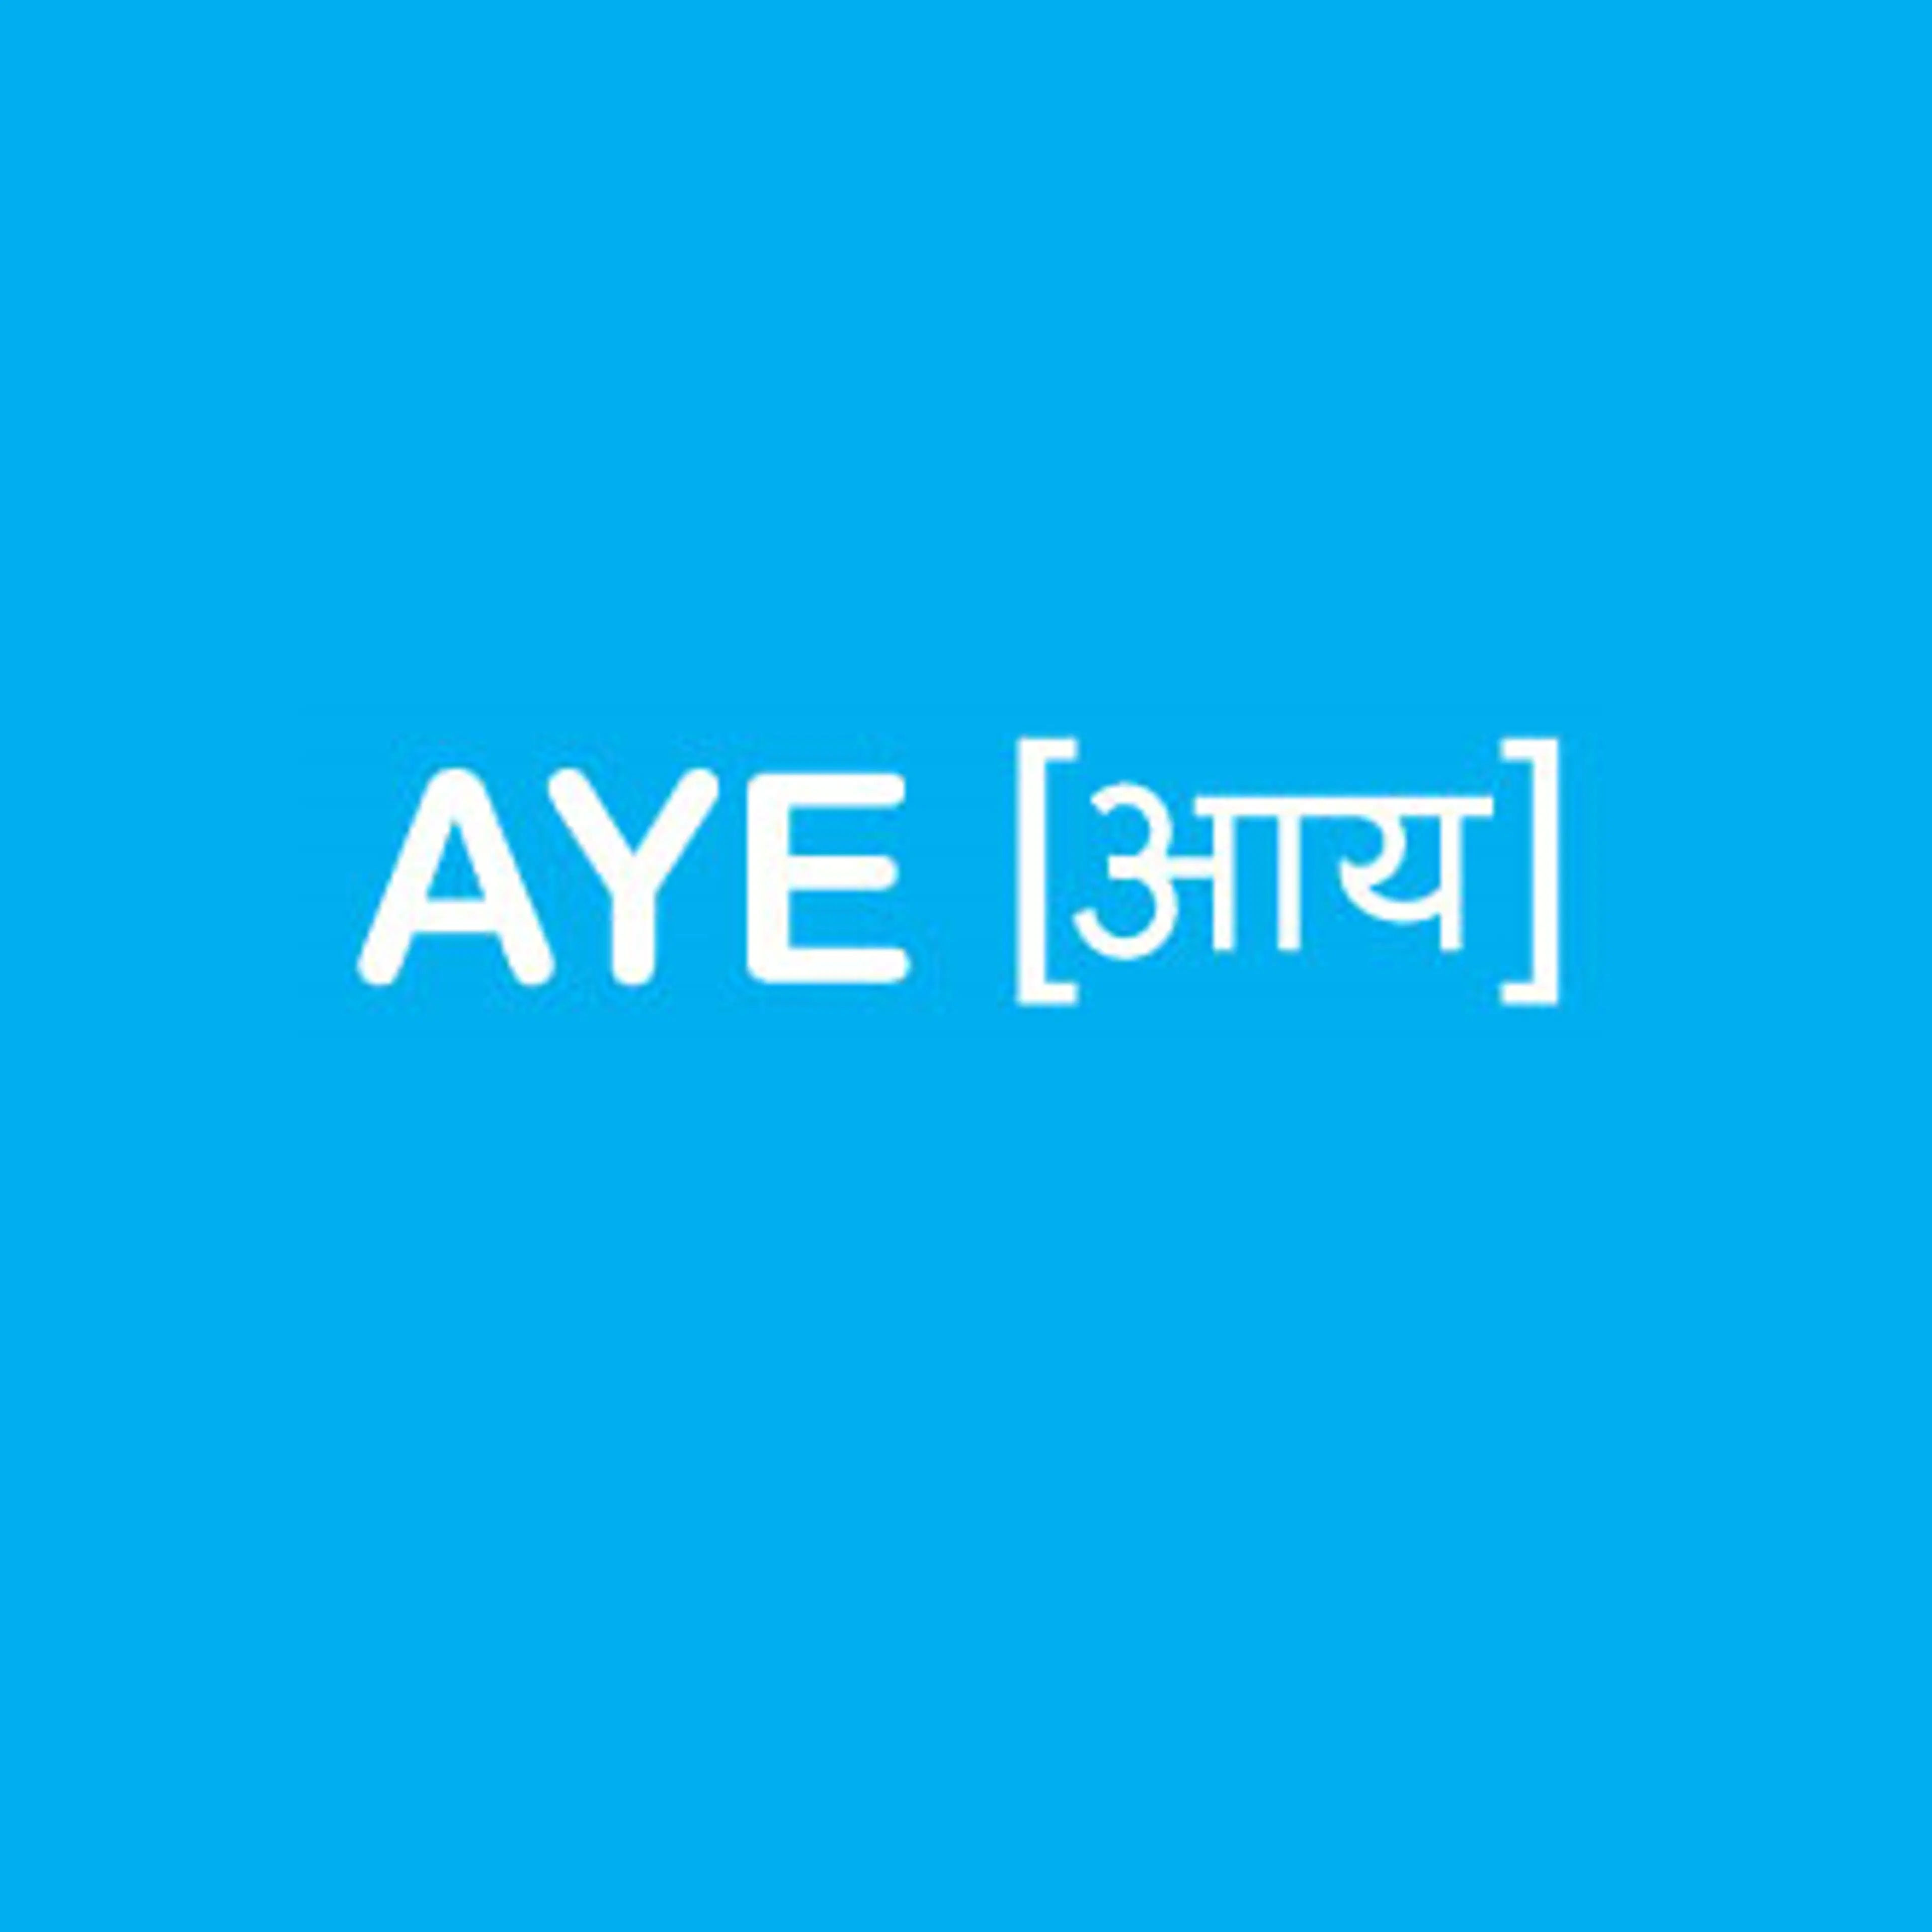 Aye Finance secures Rs 250 Cr debt funding from FMO